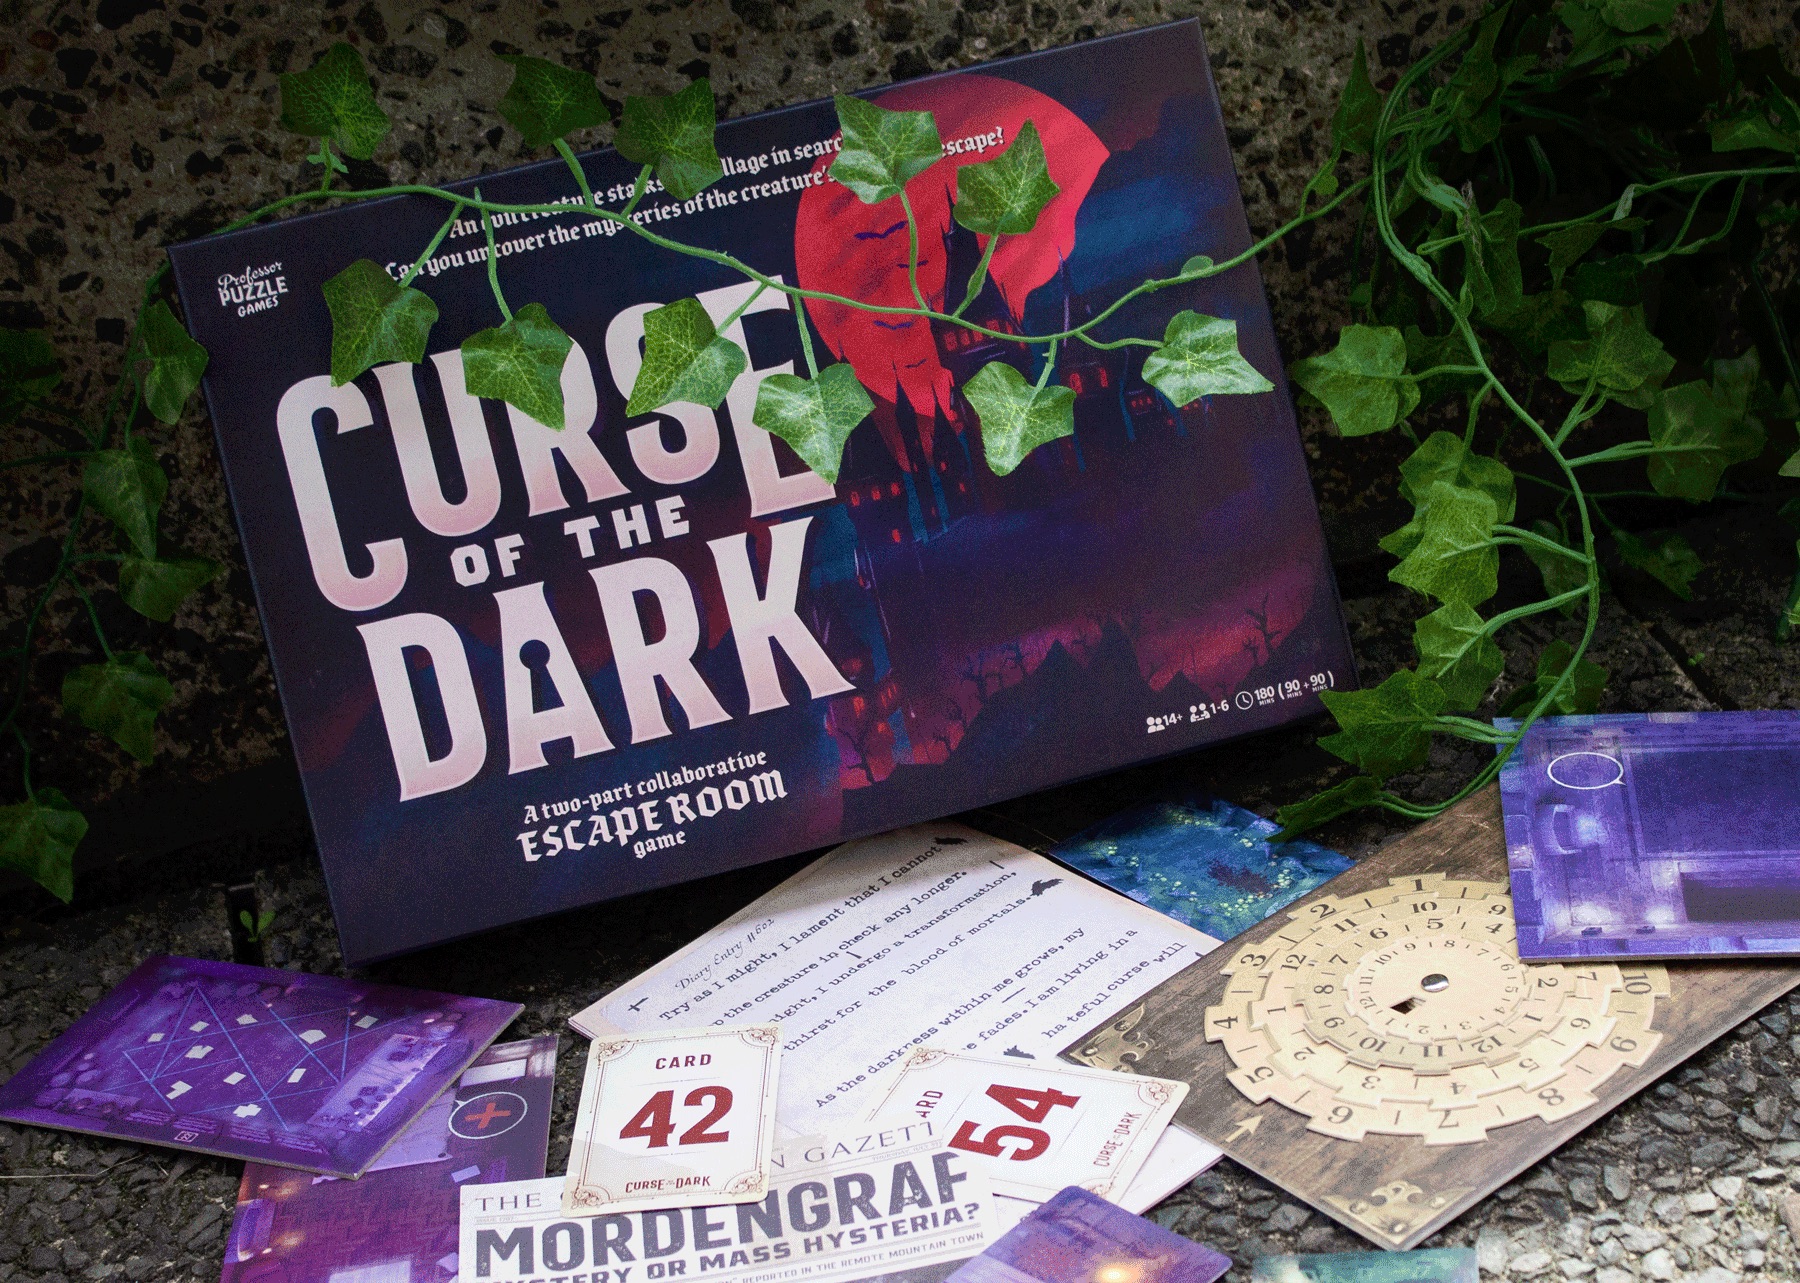 Curse of the Dark wins the Badge of Honour!